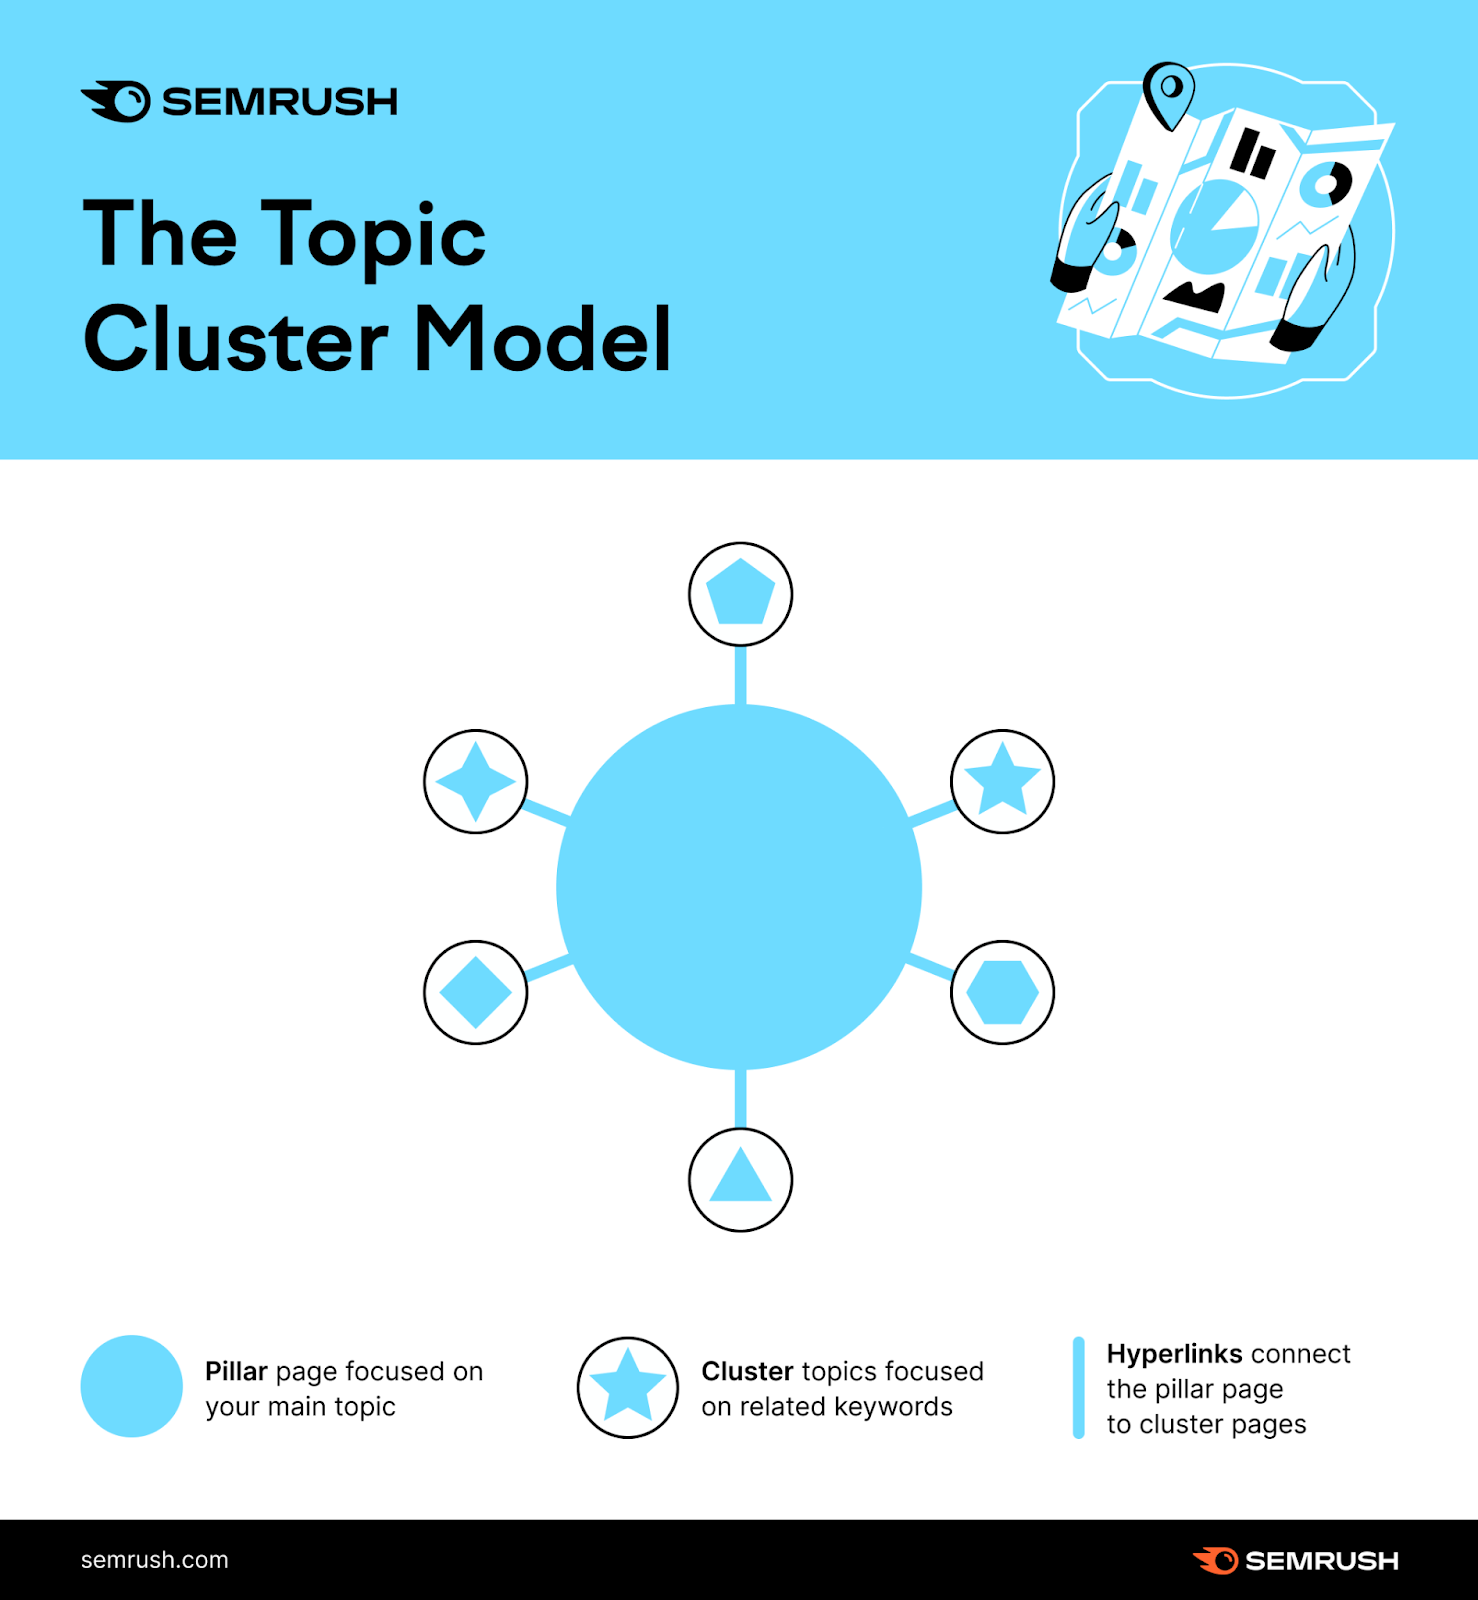 an image by Semrush illustrating the topic cluster model